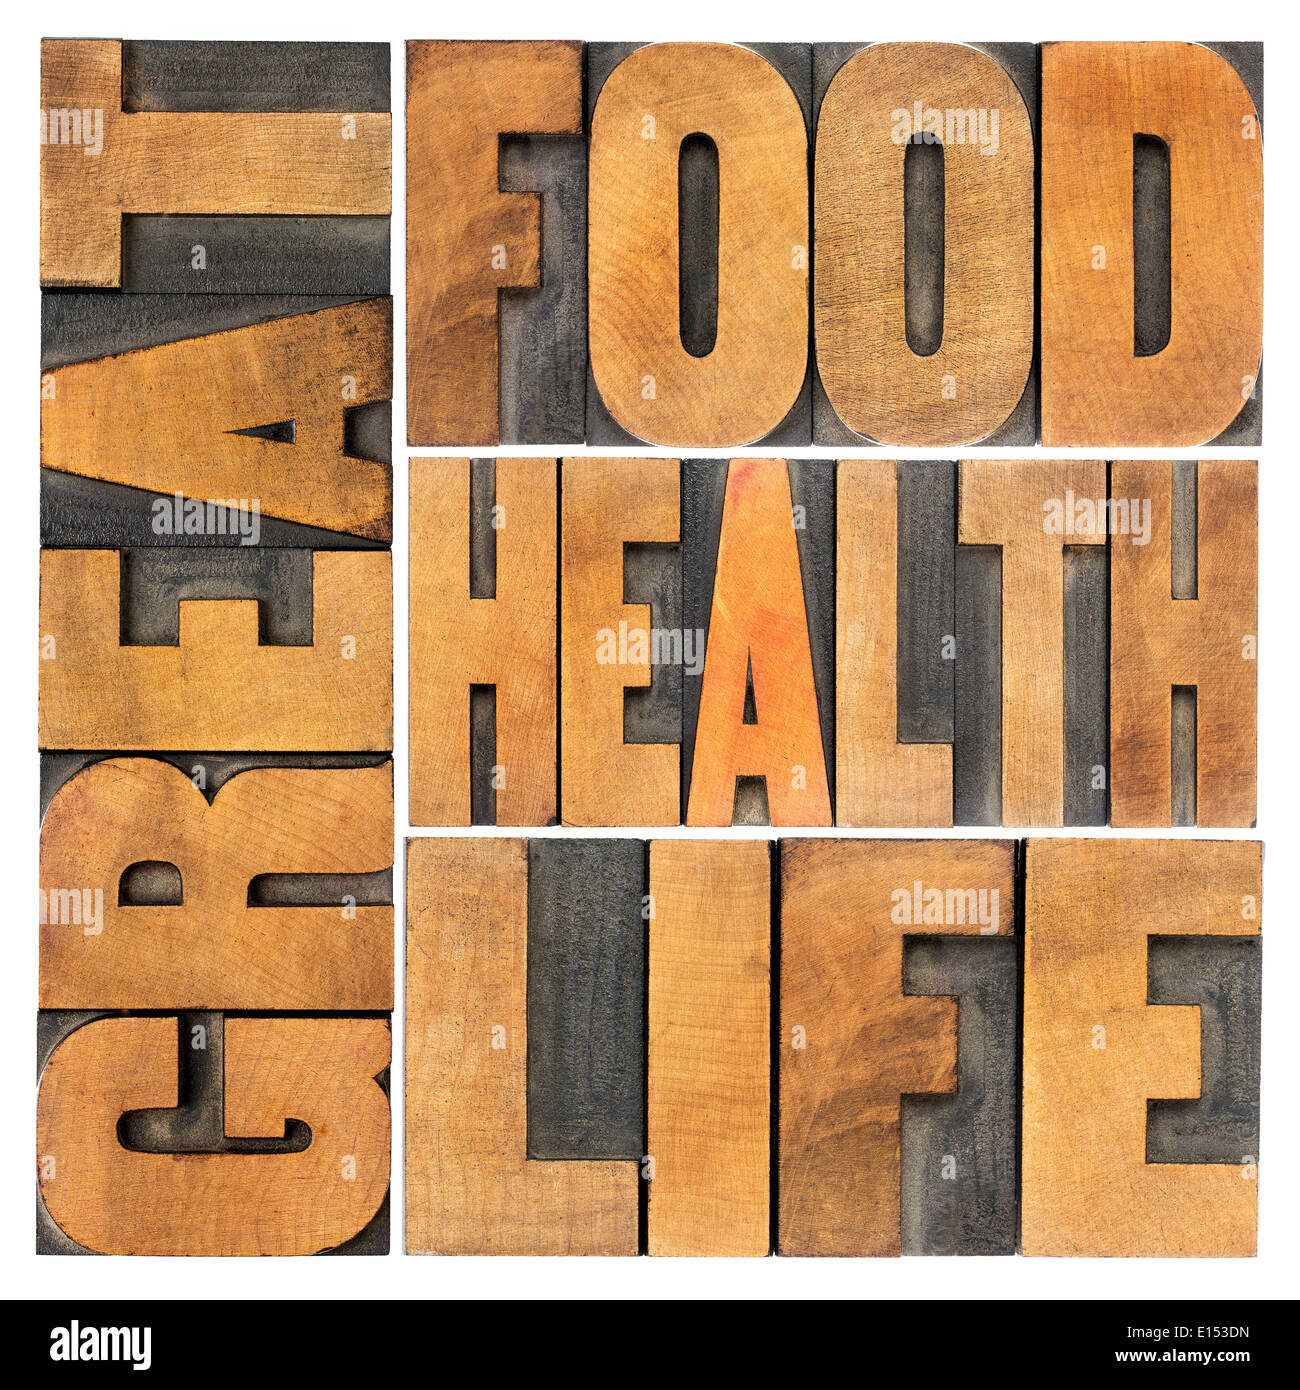 great food, health and life - healthy eating and lifestyle concept - isolated word abstract in letterpress wood type Stock Photo